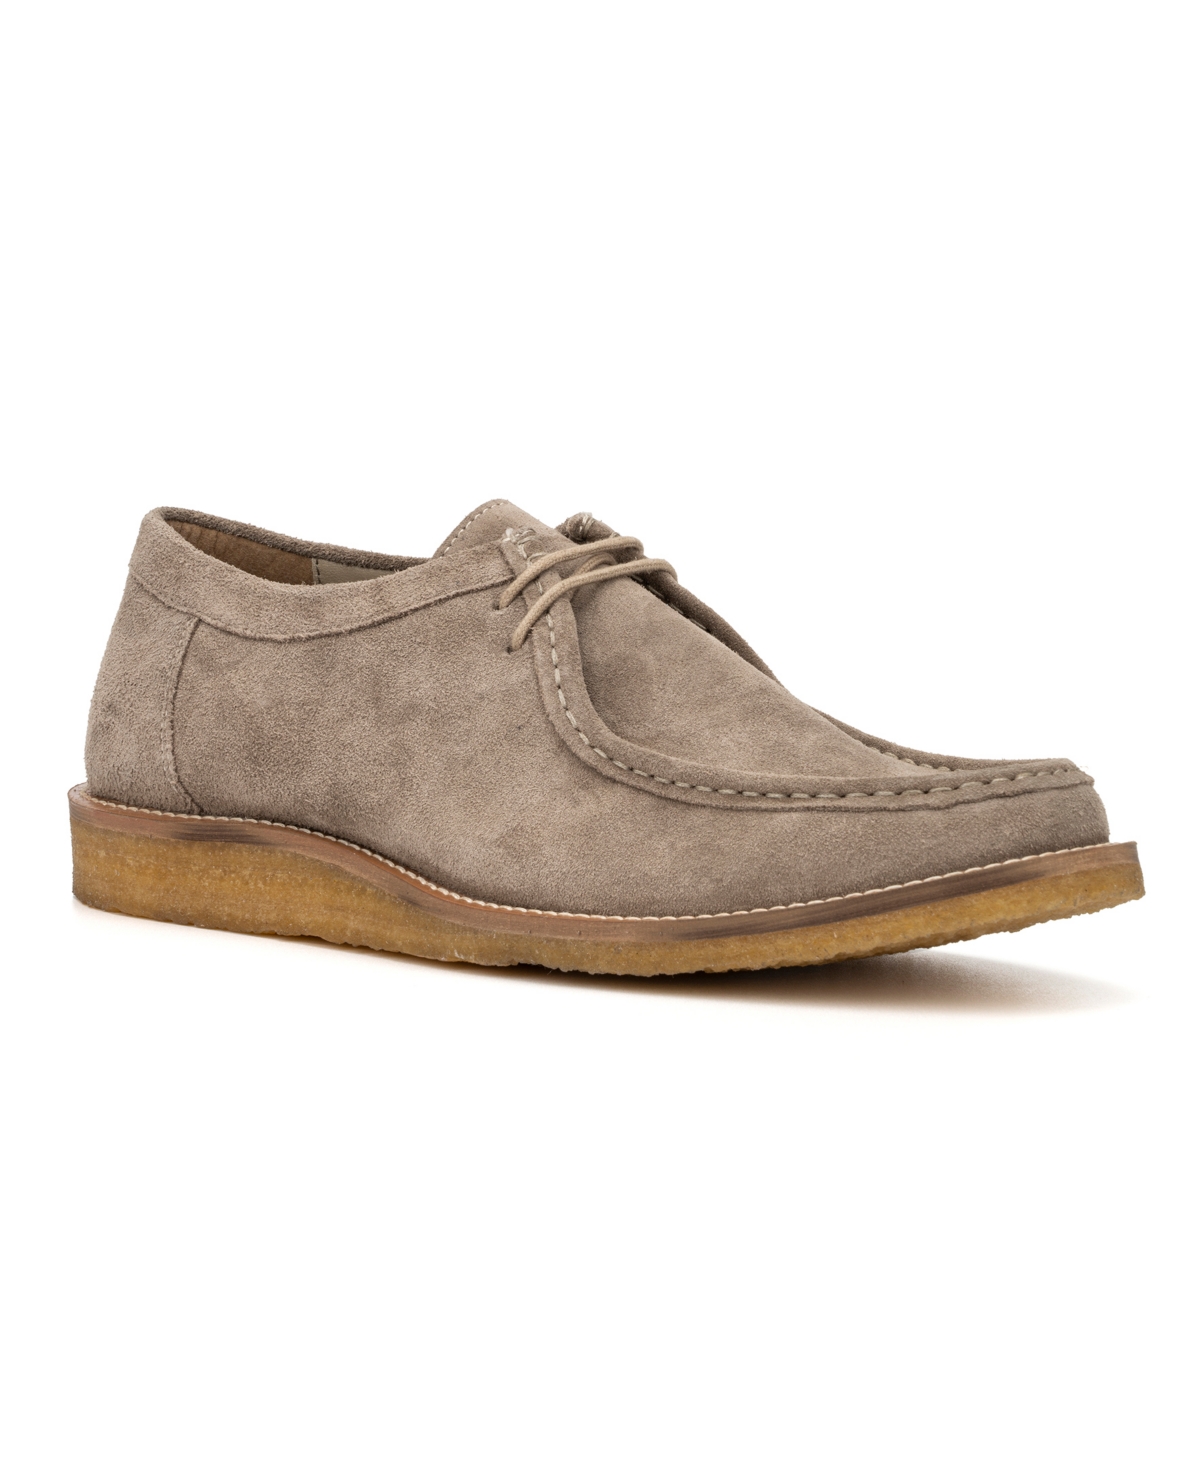 Men's Oziah Leather Loafers - Taupe